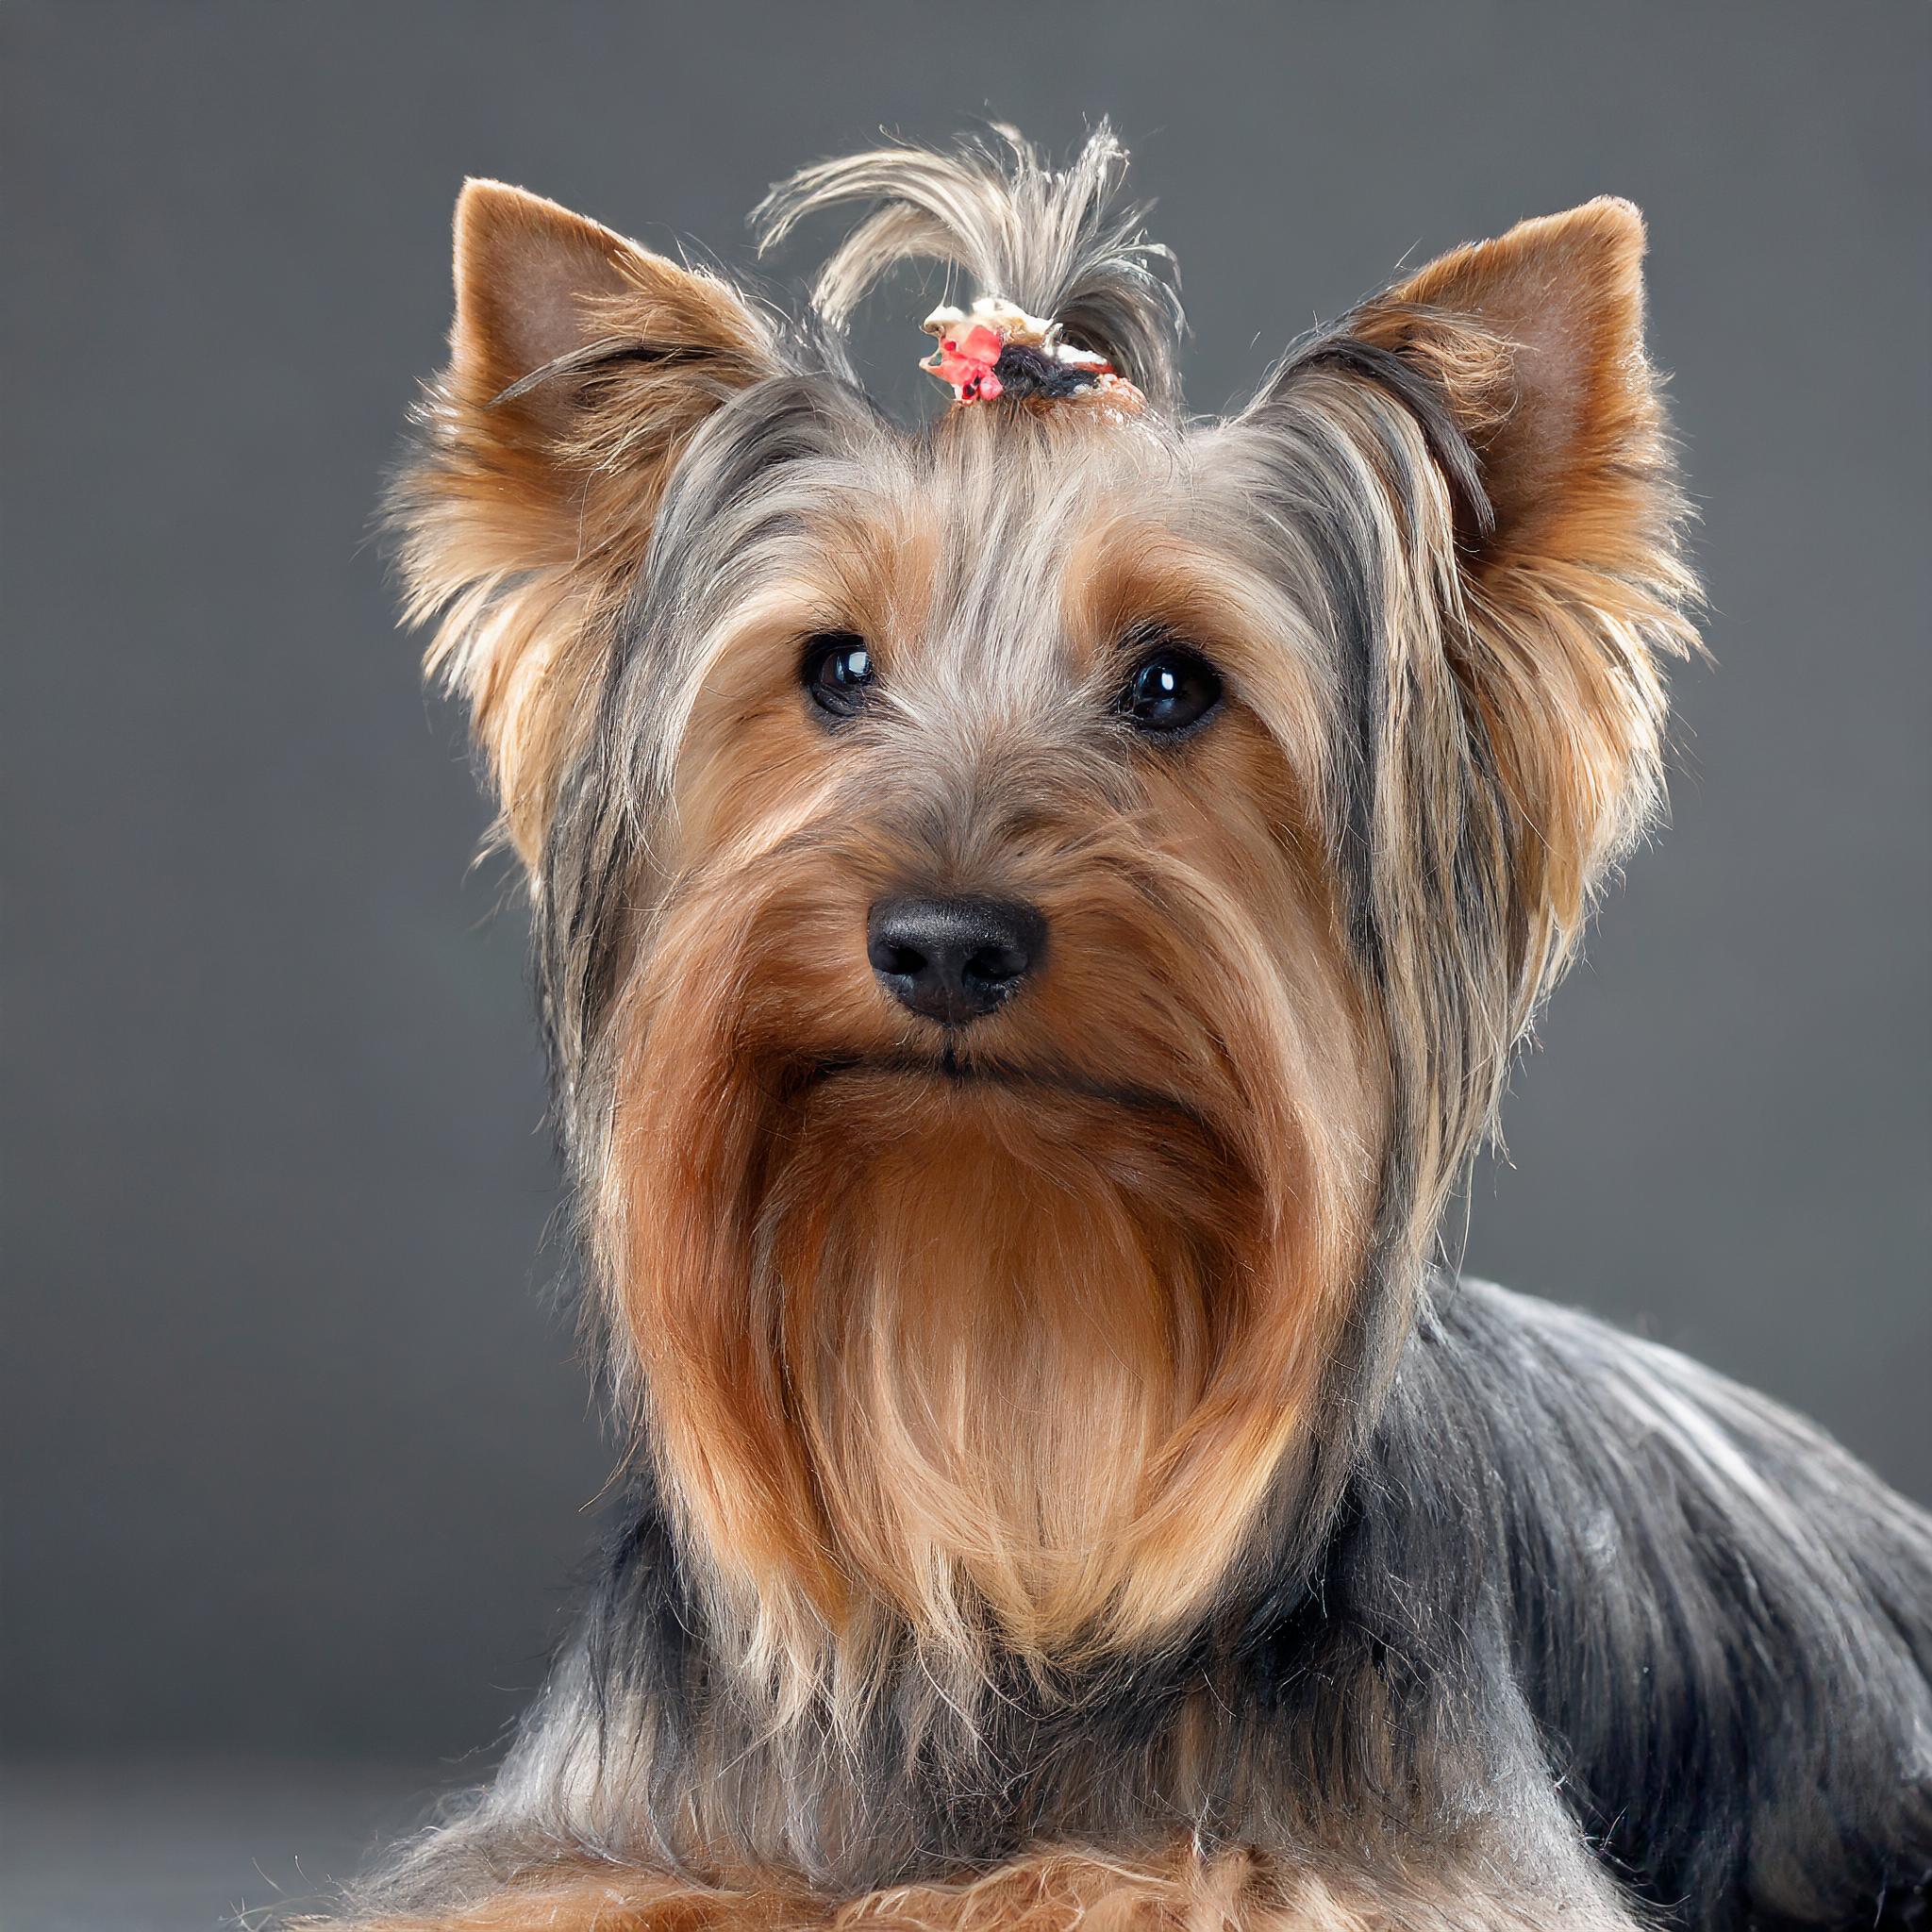 The australian silky terrier was developed in Australia, although the ancestral types and breeds were from Great Britain. It is closely related to the Australian Terrier and the Yorkshire Terrier.